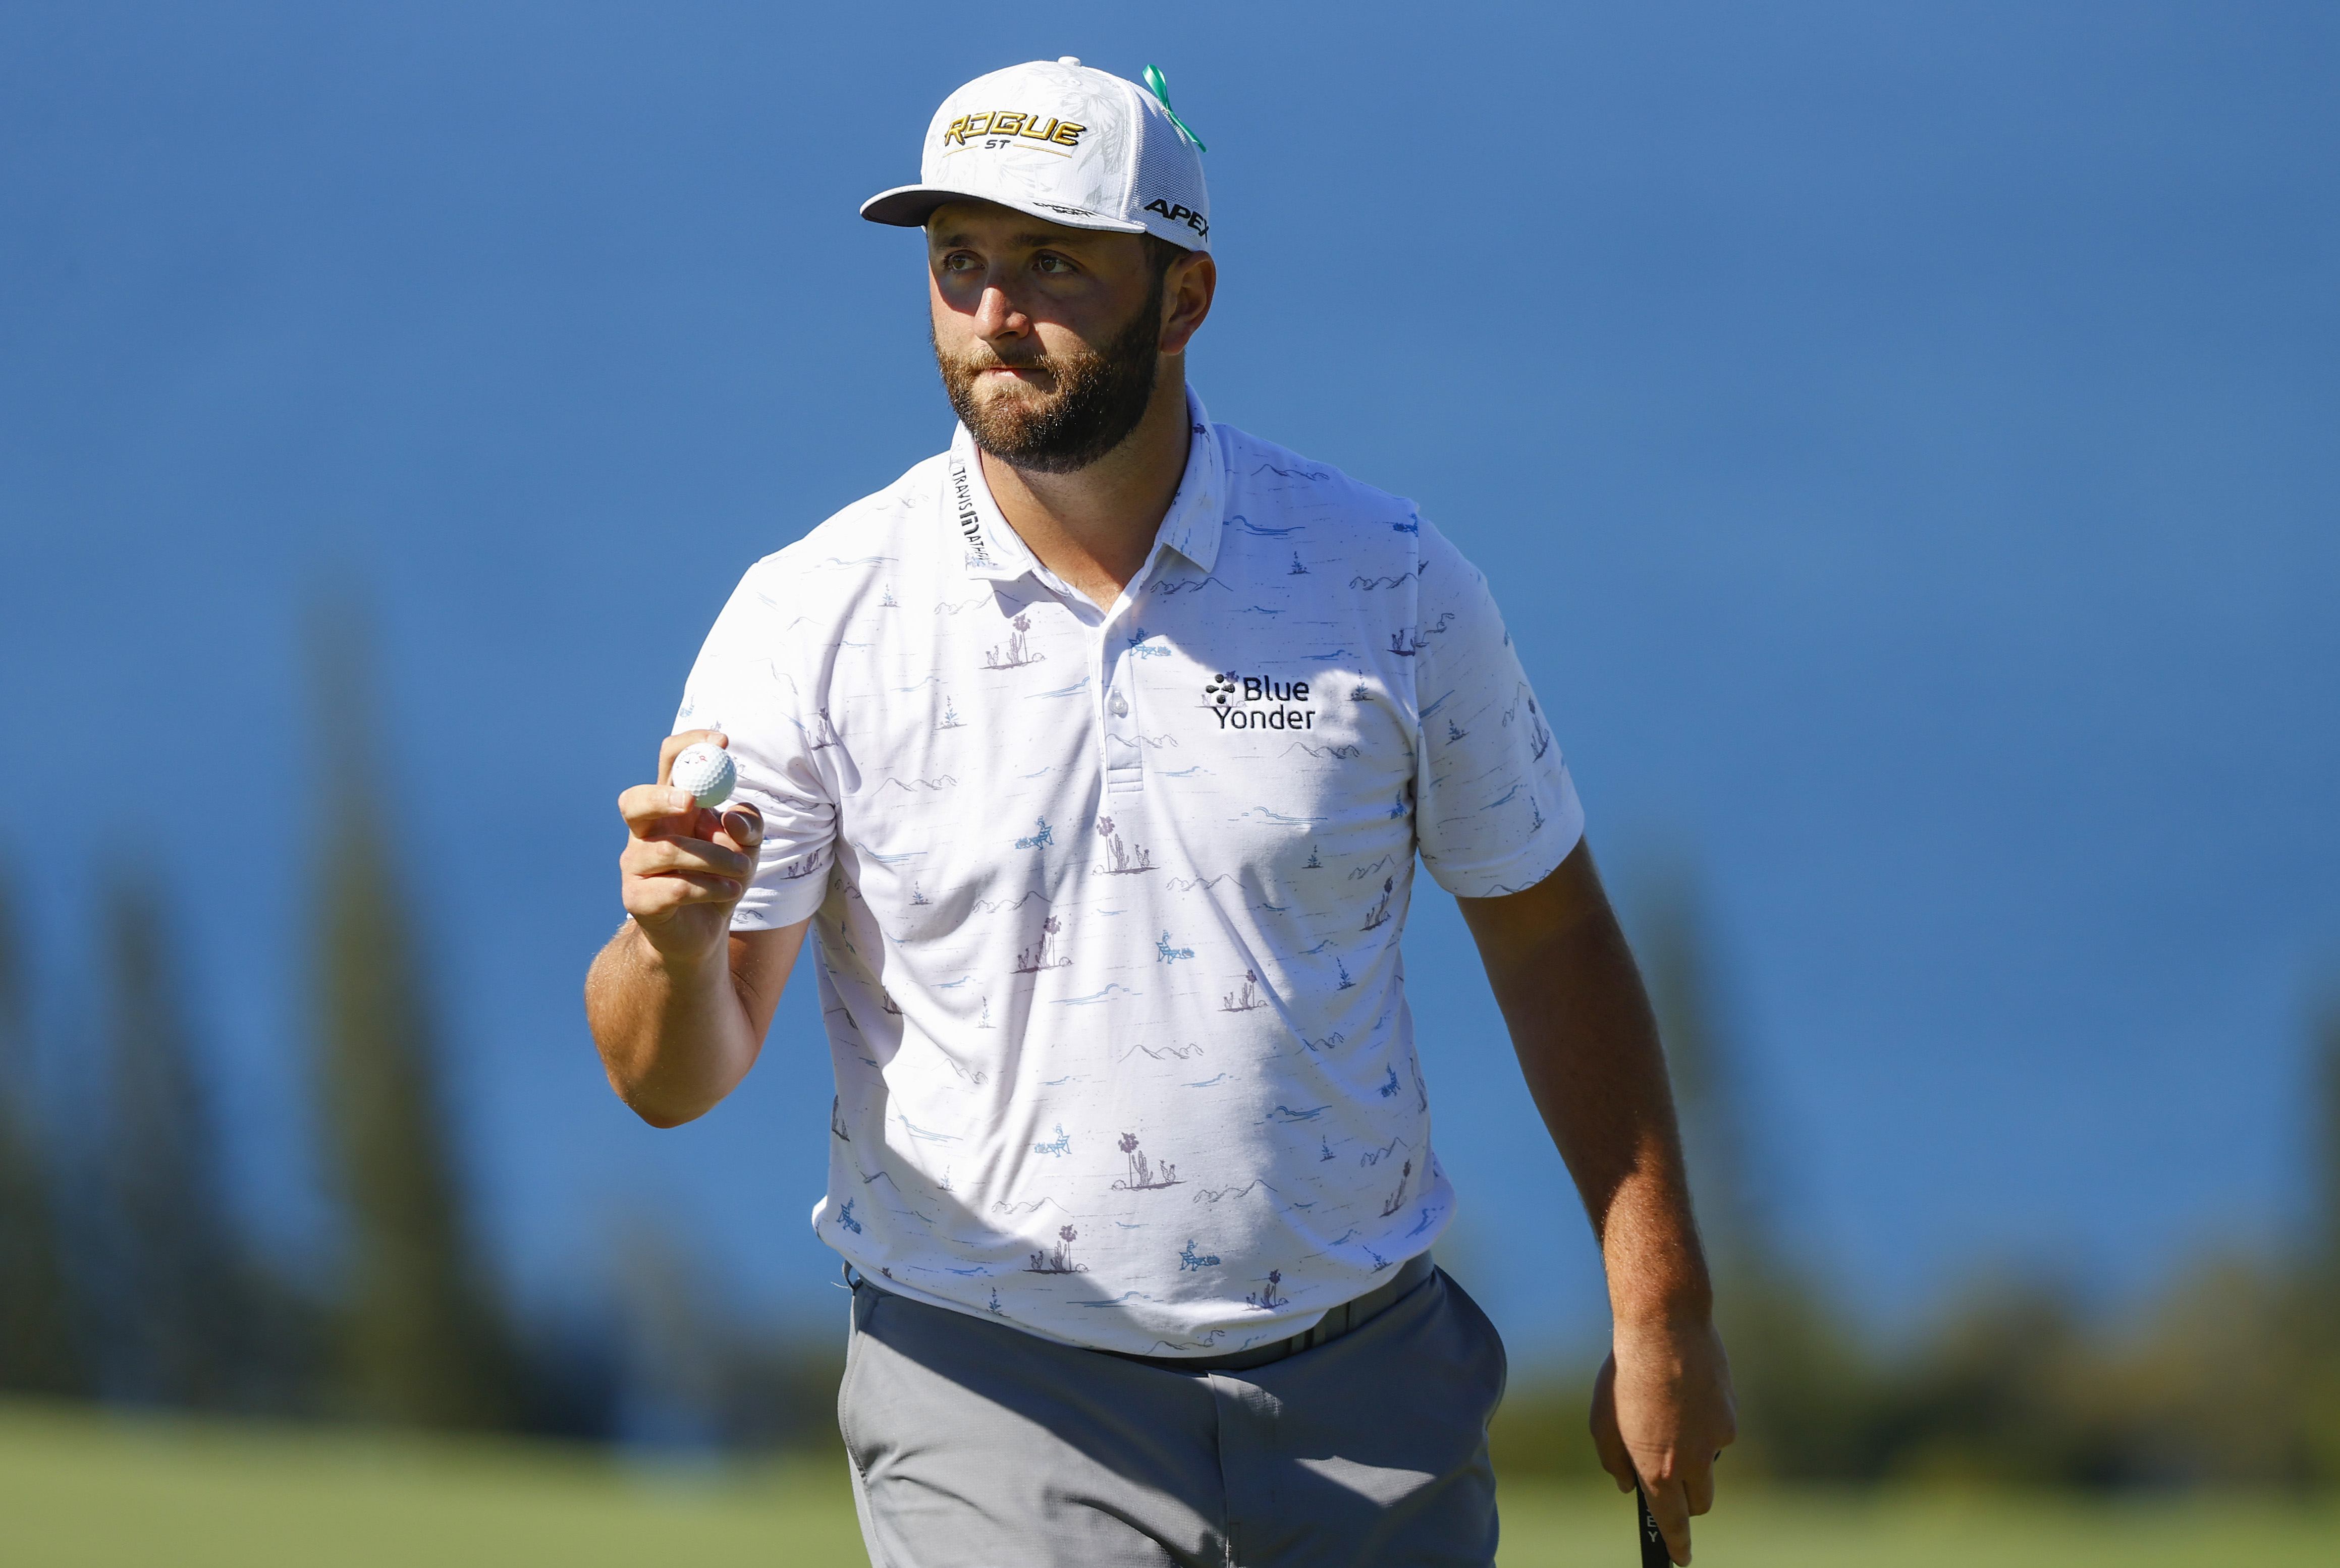 Jon Rahm passed a ridiculous earnings milestone with runner-up finish Golf News and Tour Information Golf Digest